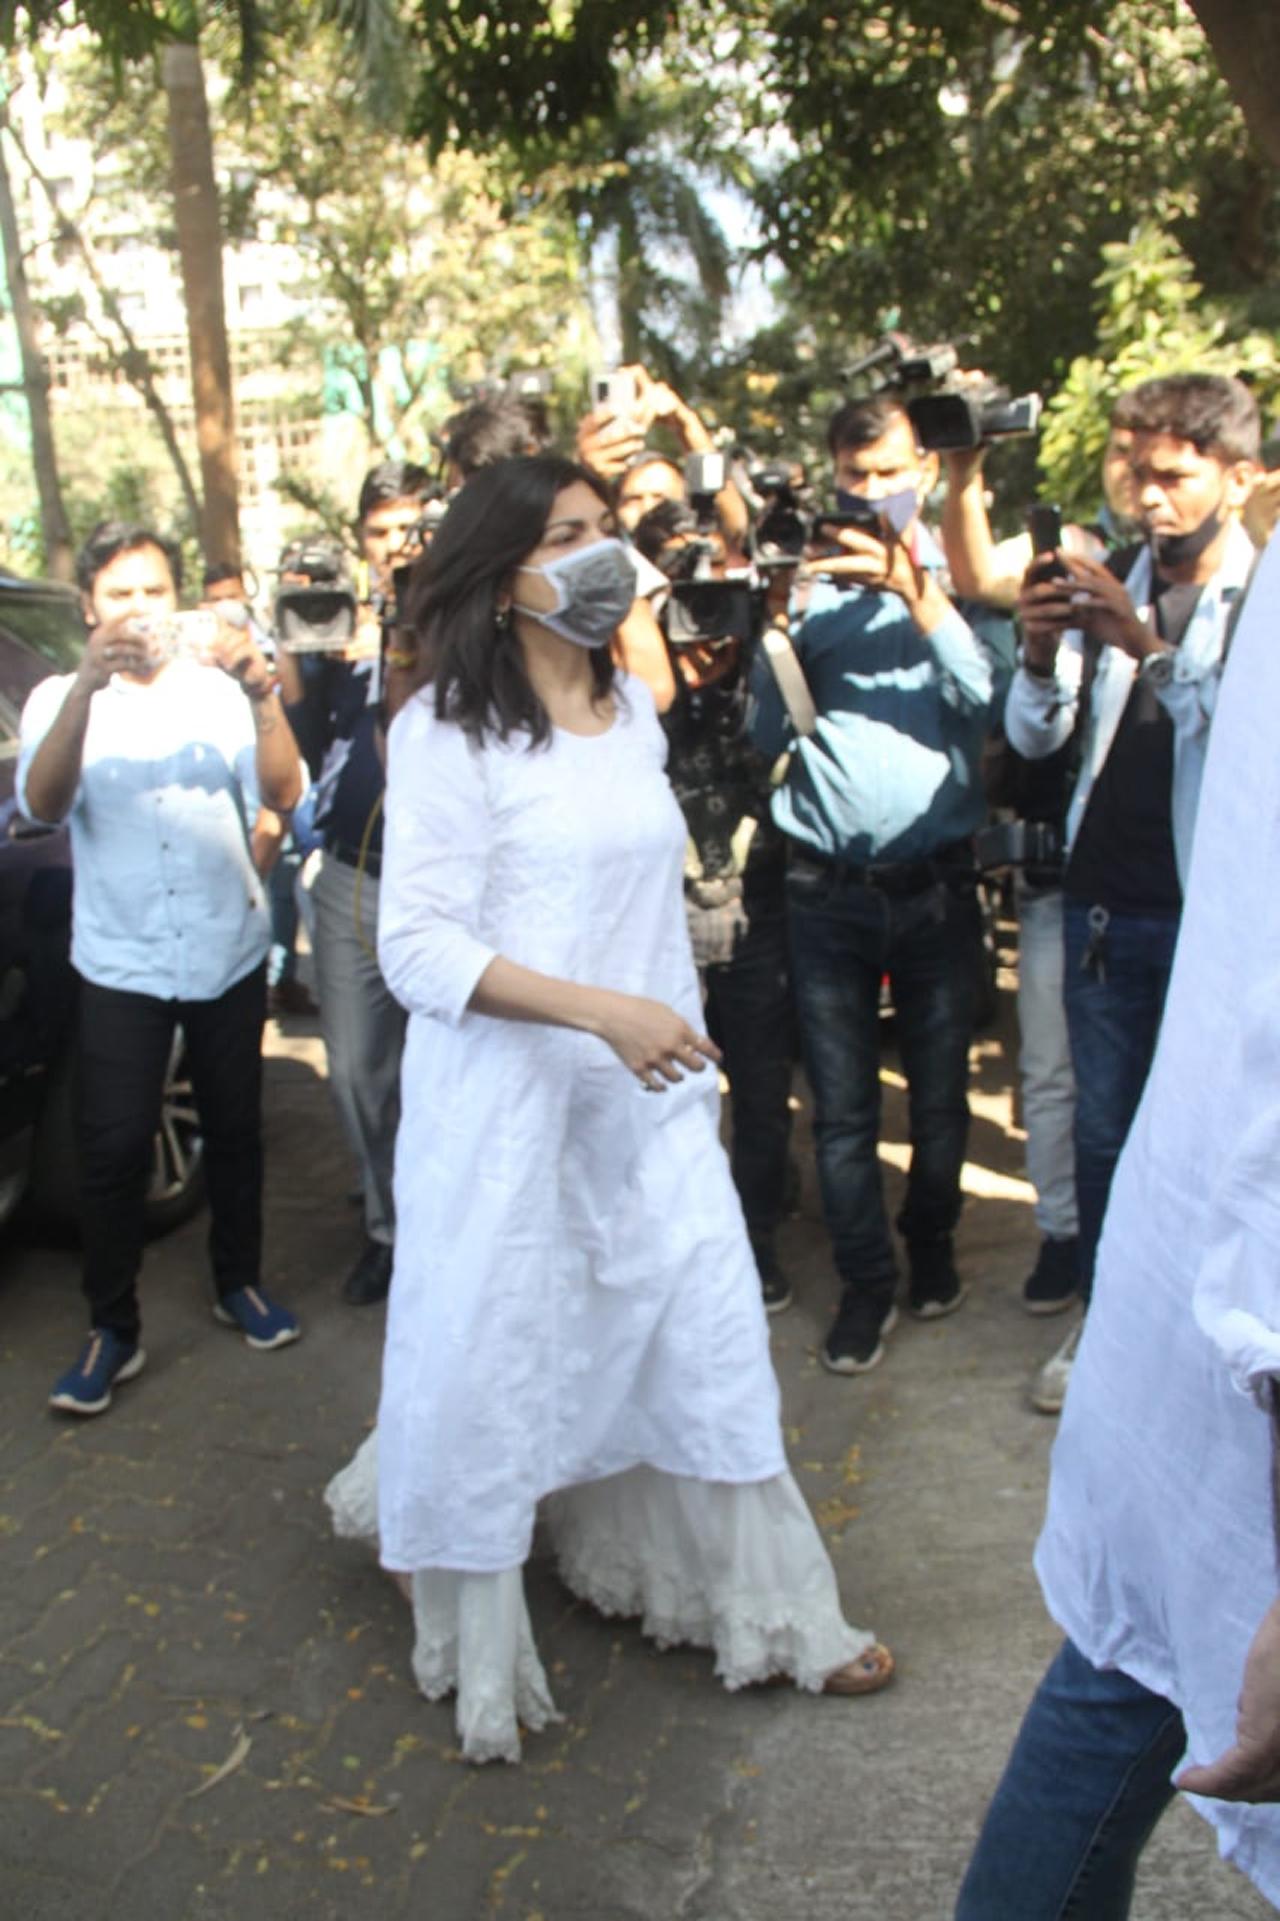 Alka Yagnik visited Bappi Lahiri's residence in Mumbai to pay homage to the late hitmaker. She was captured by the paparazzi while making her way to Bappi Lahiri's house. For the unversed, Bappi Lahiri had collaborated with Alka Yagnik on several songs, especially in Bengali films. 'Phool To Amari Chilo', 'Tomar Naam Likhe Debo', and 'Aajker Prem' are some of their successful collaborations in Bengali.
Picture courtesy: Yogen Shah